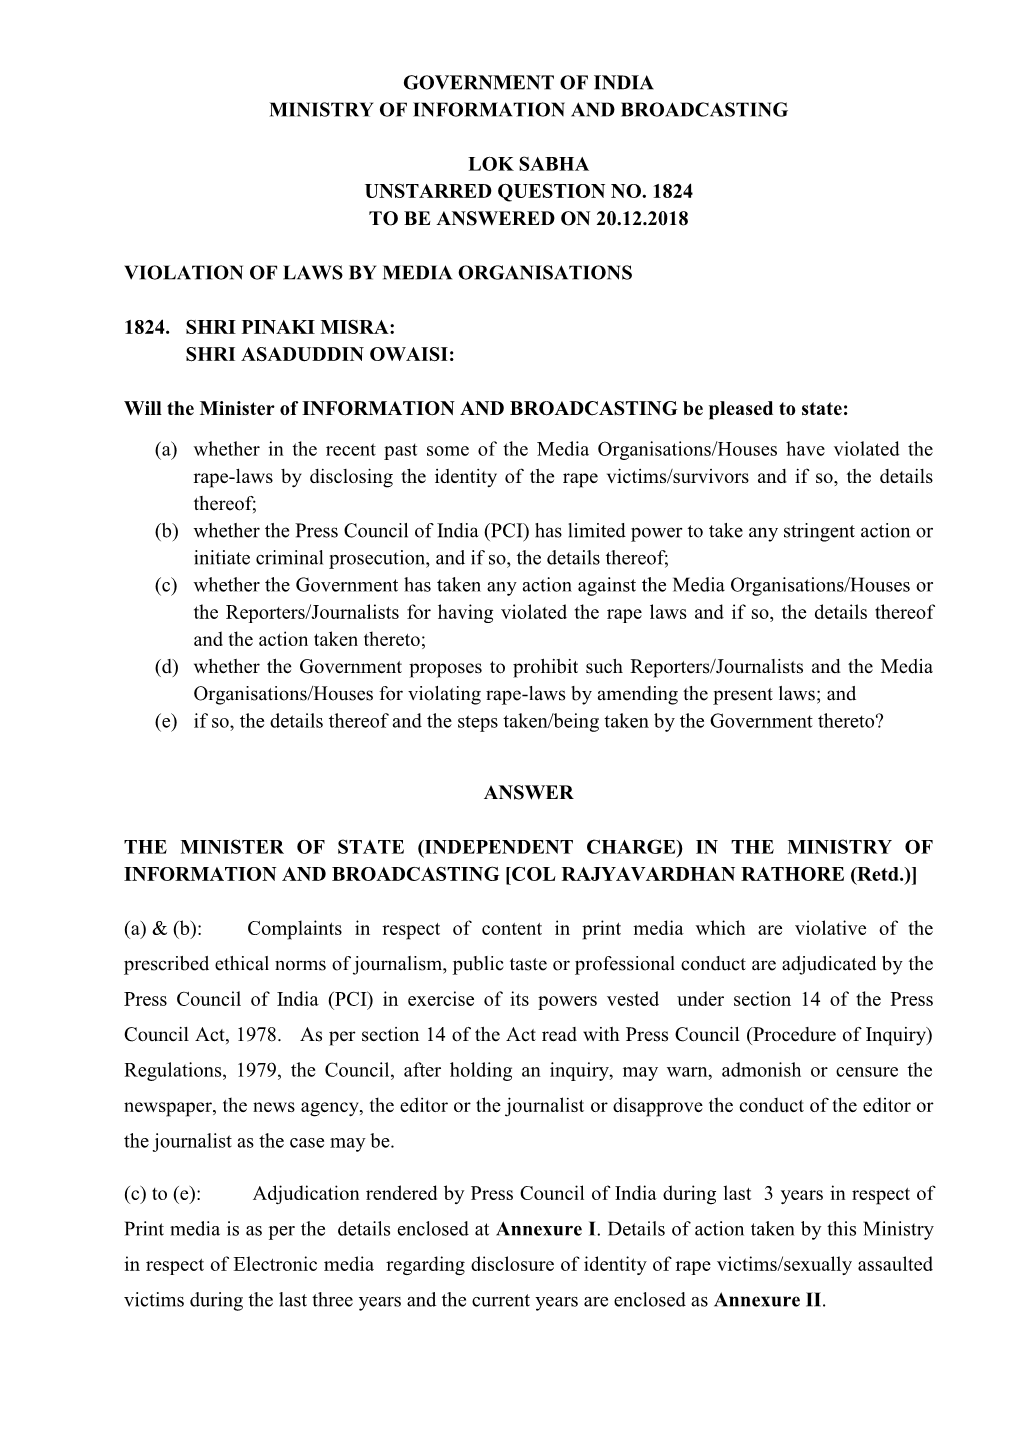 Government of India Ministry of Information and Broadcasting Lok Sabha Unstarred Question No. 1824 to Be Answered on 20.12.2018